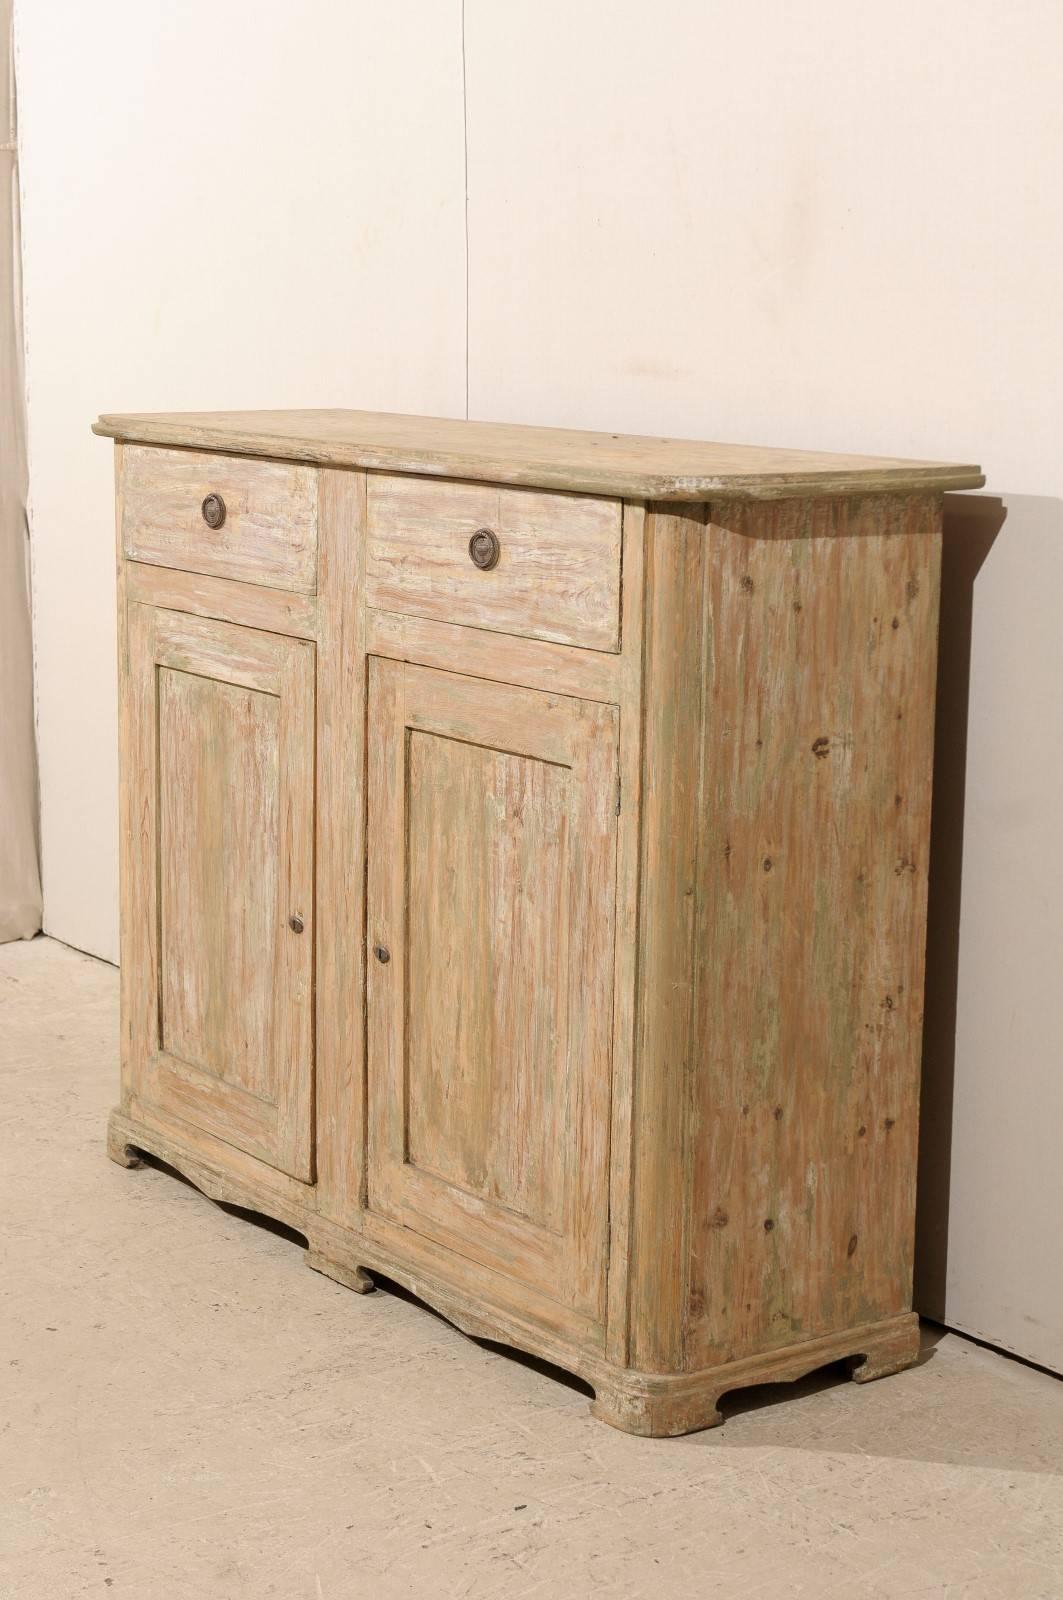 Swedish Painted Wood Buffet with Two Drawers and Two Doors from the 19th Century For Sale 1